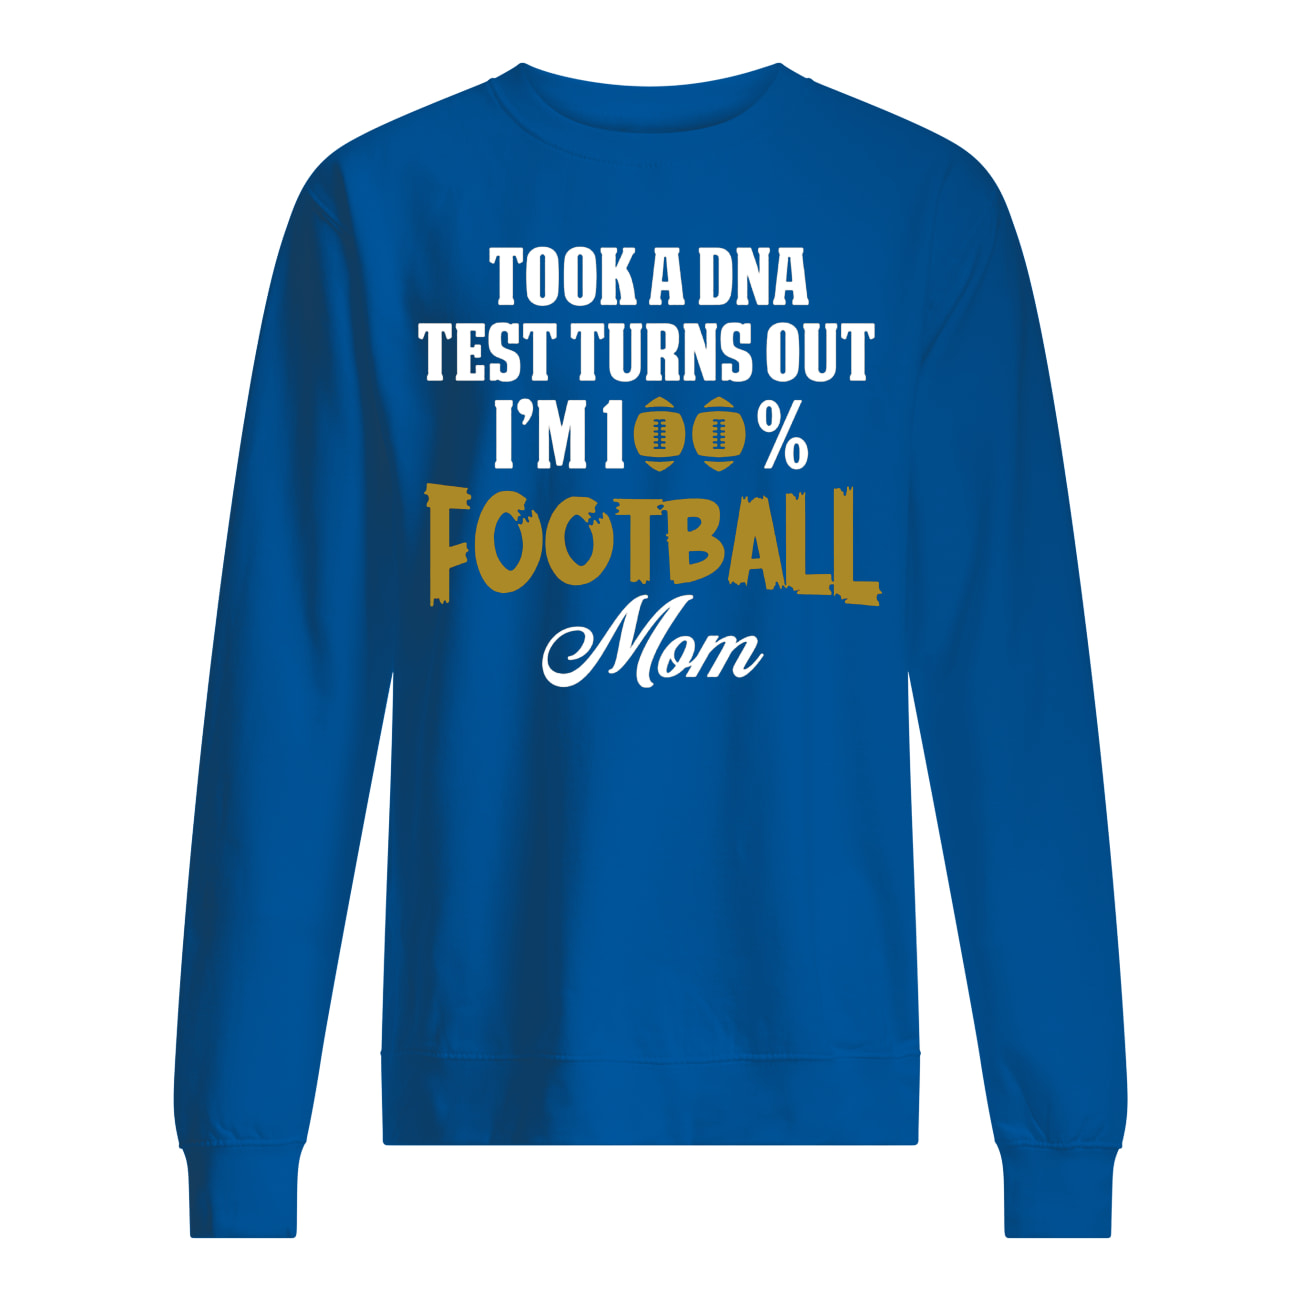 Took a dna test turns out I'm 100% football mom sweatshirt